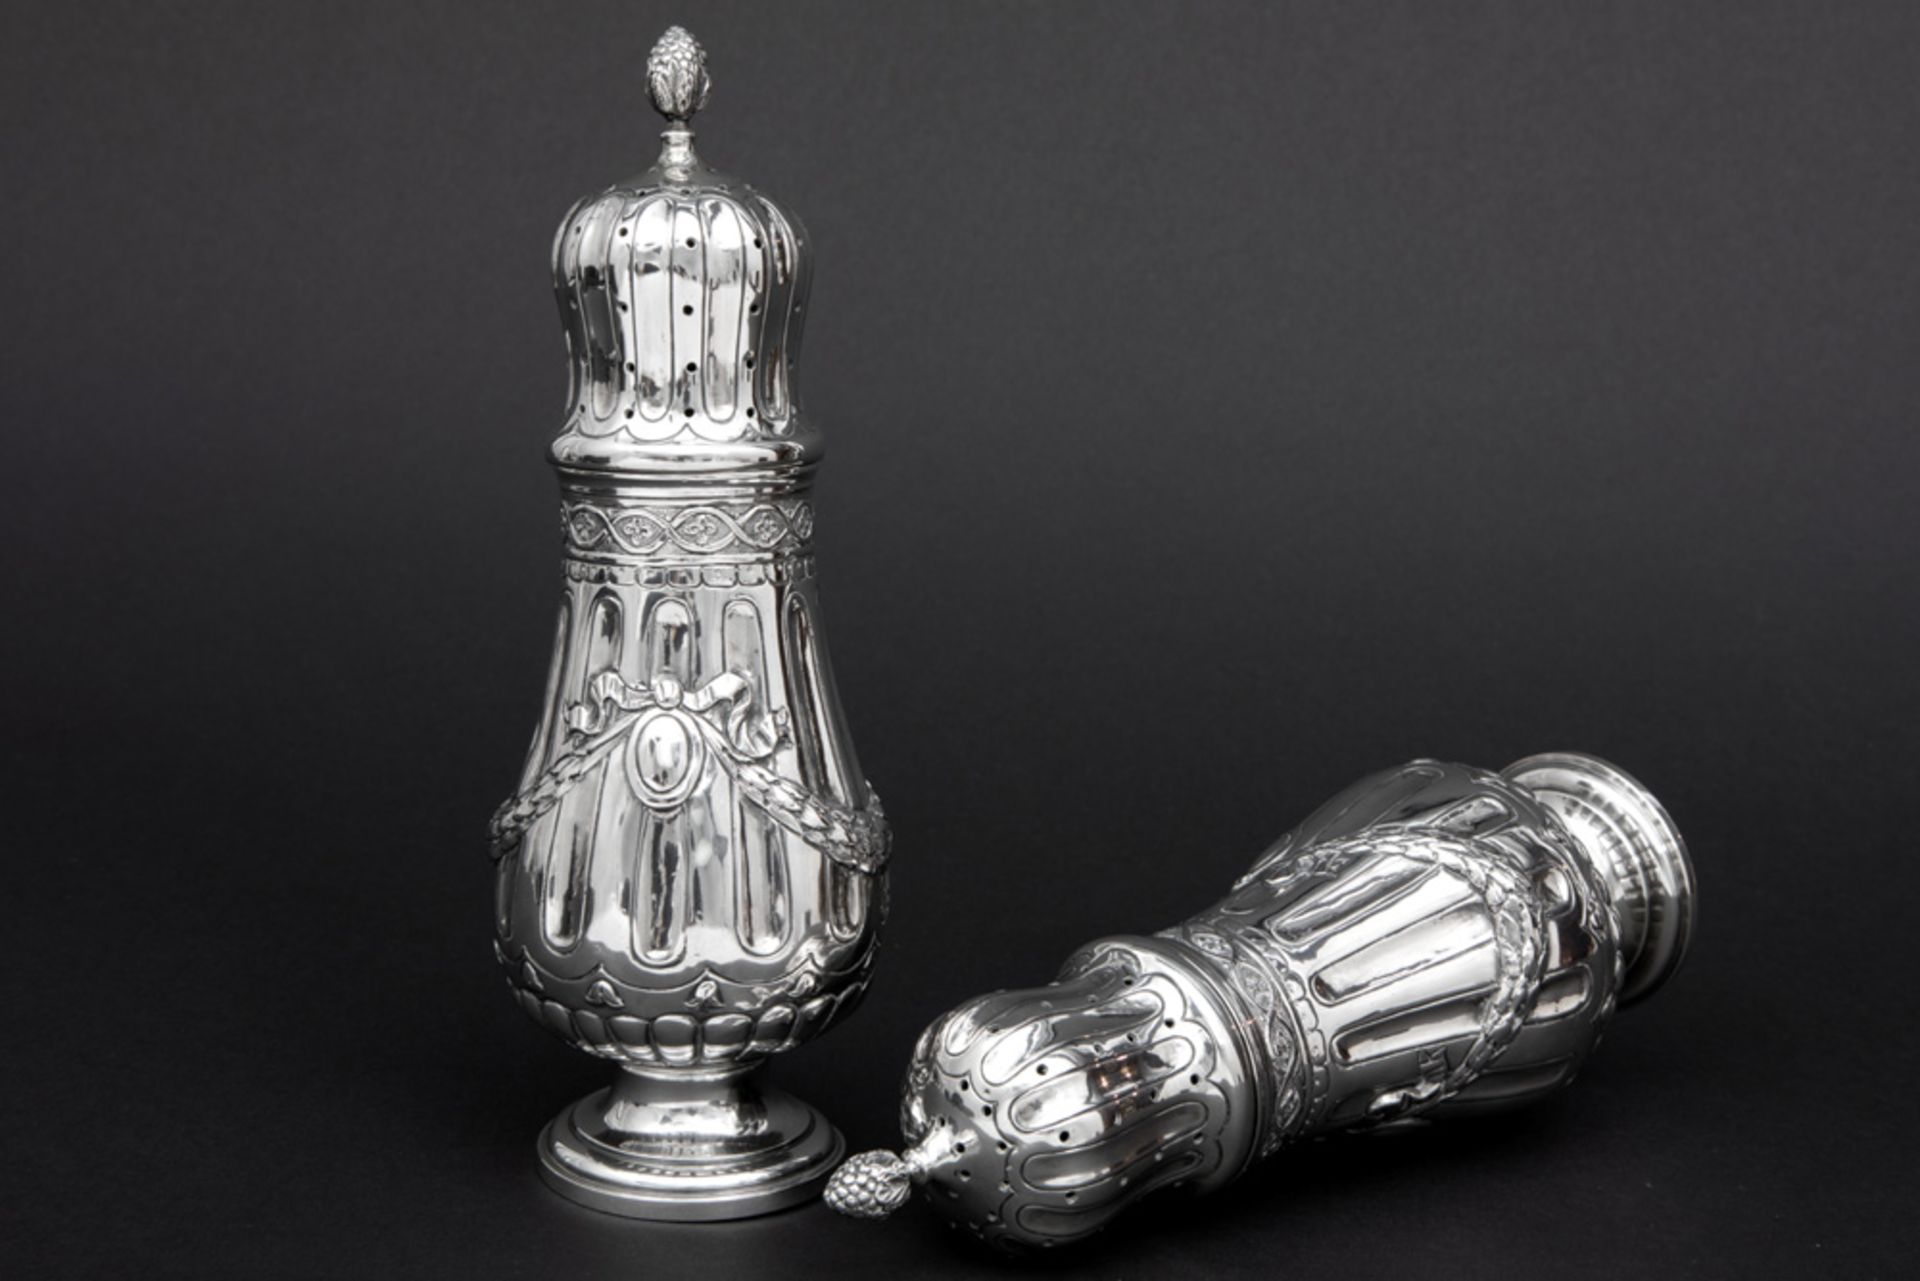 pair of German antique neoclassical casters in marked silver with typical Louis XVI design and - Image 3 of 4